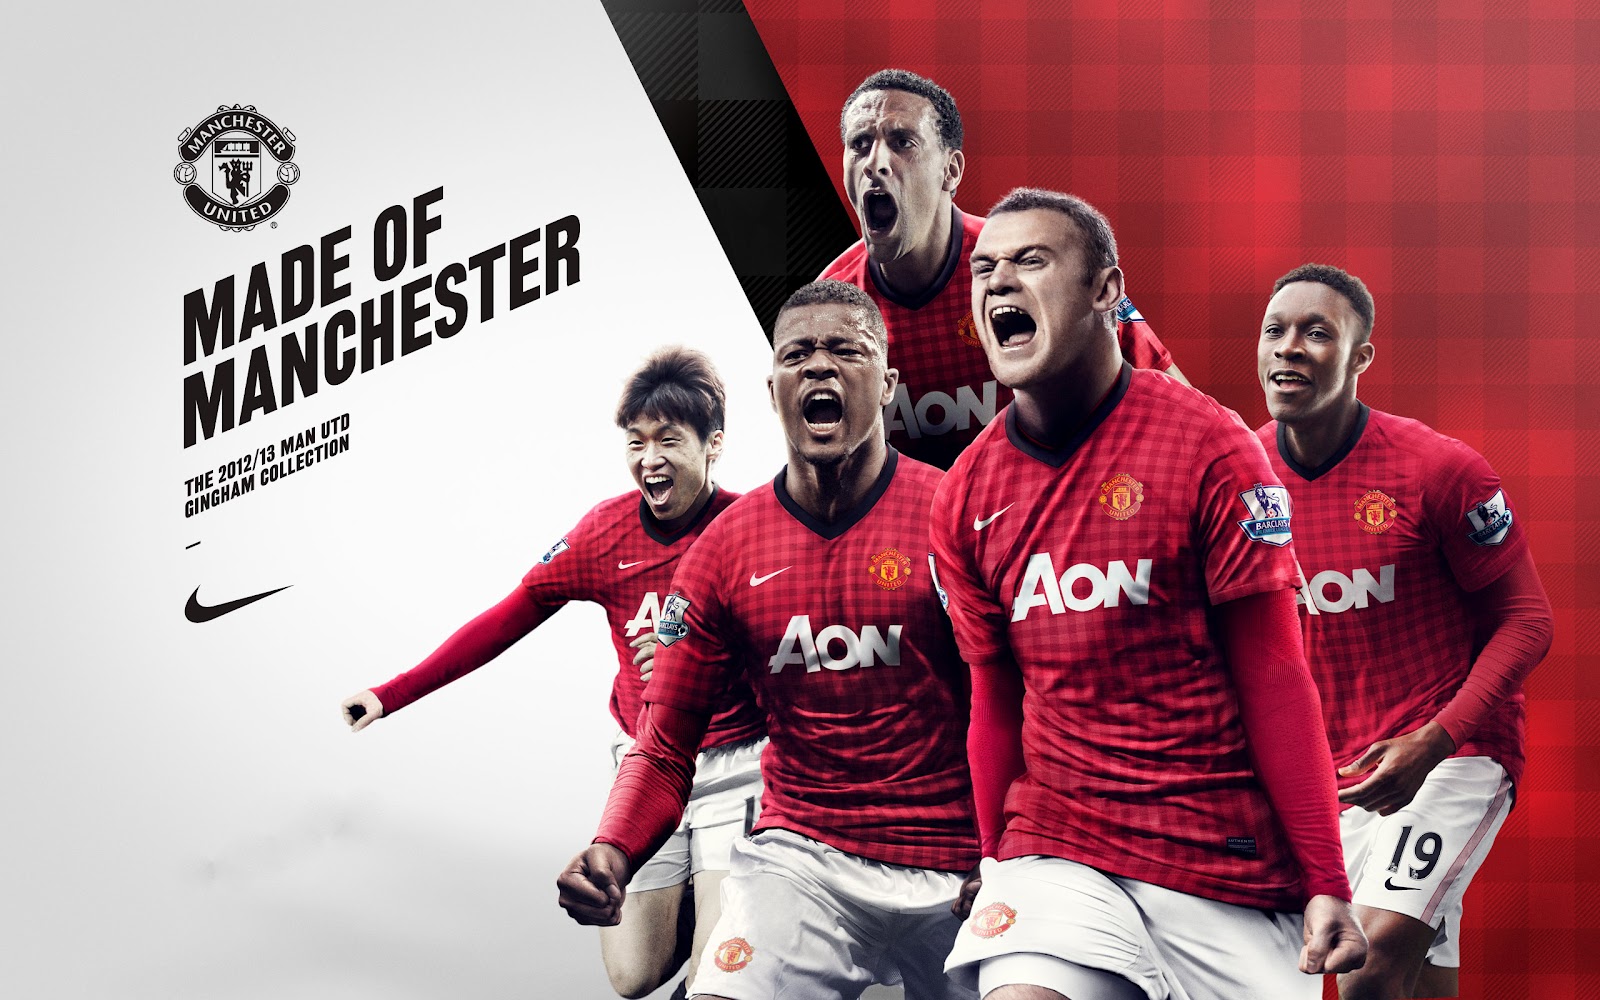 Manchester United 2013 Wallpapers 2013 HD